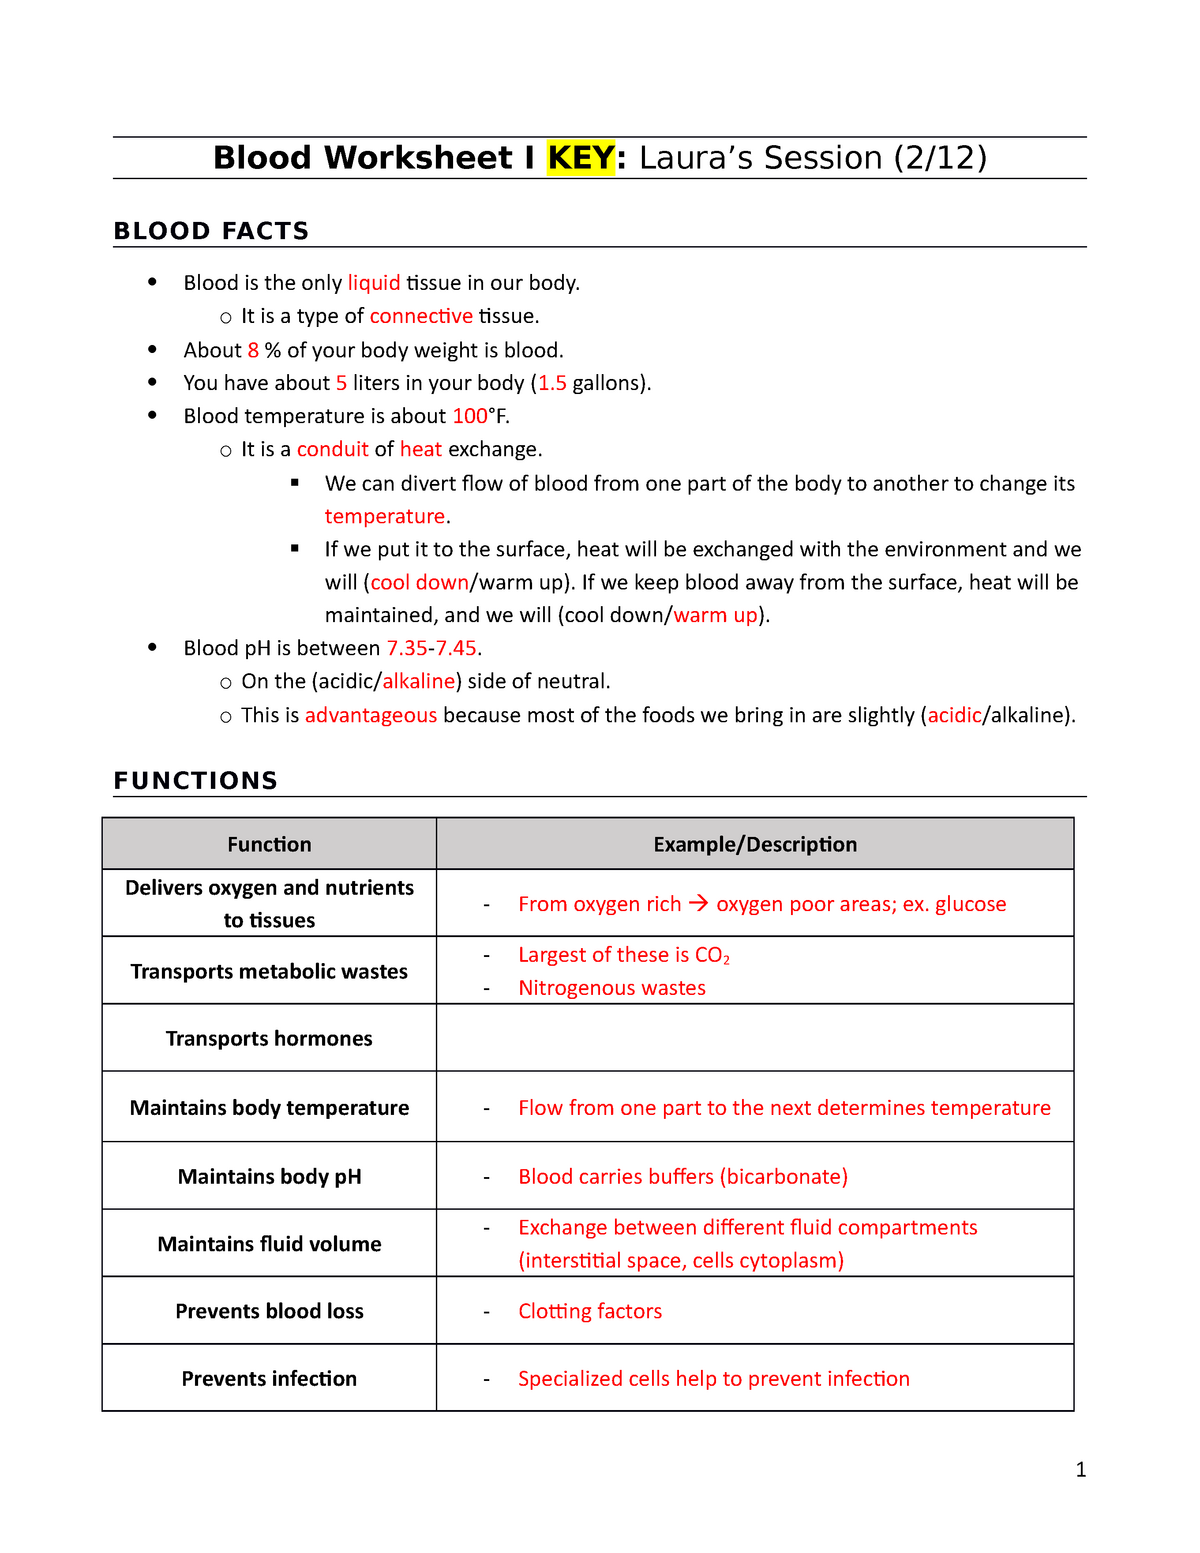 pal-blood-worksheet-i-key-blood-worksheet-i-key-laura-s-session-2